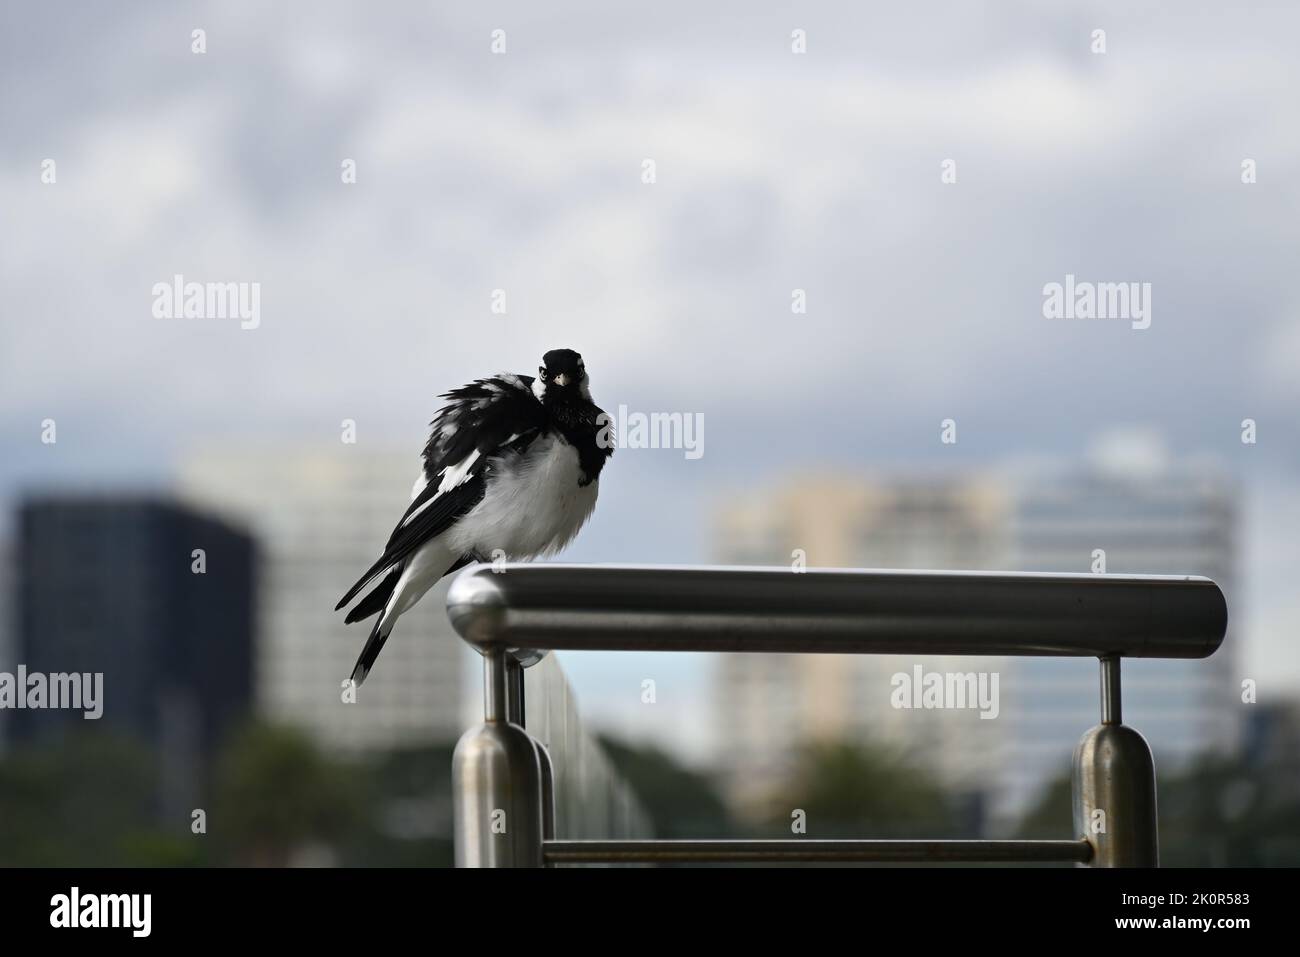 Magpie-lark, grallina cyanoleuca, perched on metal railing with its feathers puffed up, as the bird stares intensely into the foreground Stock Photo